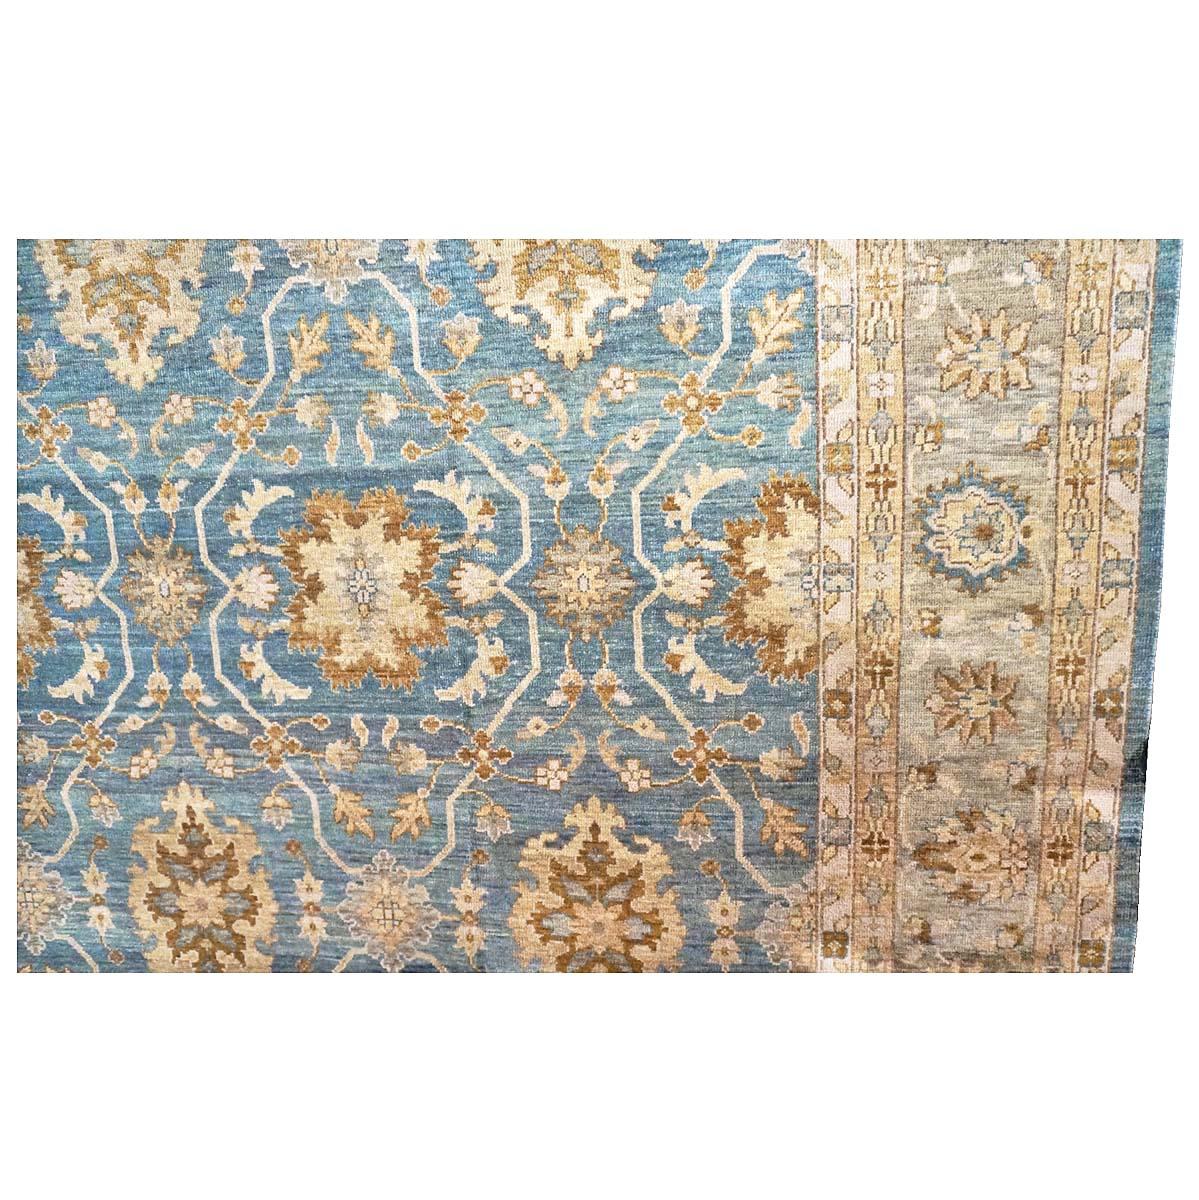 Afghan 21st Century Sultanabad Master 10x14 Blue & Gold Handmade Area Rug For Sale